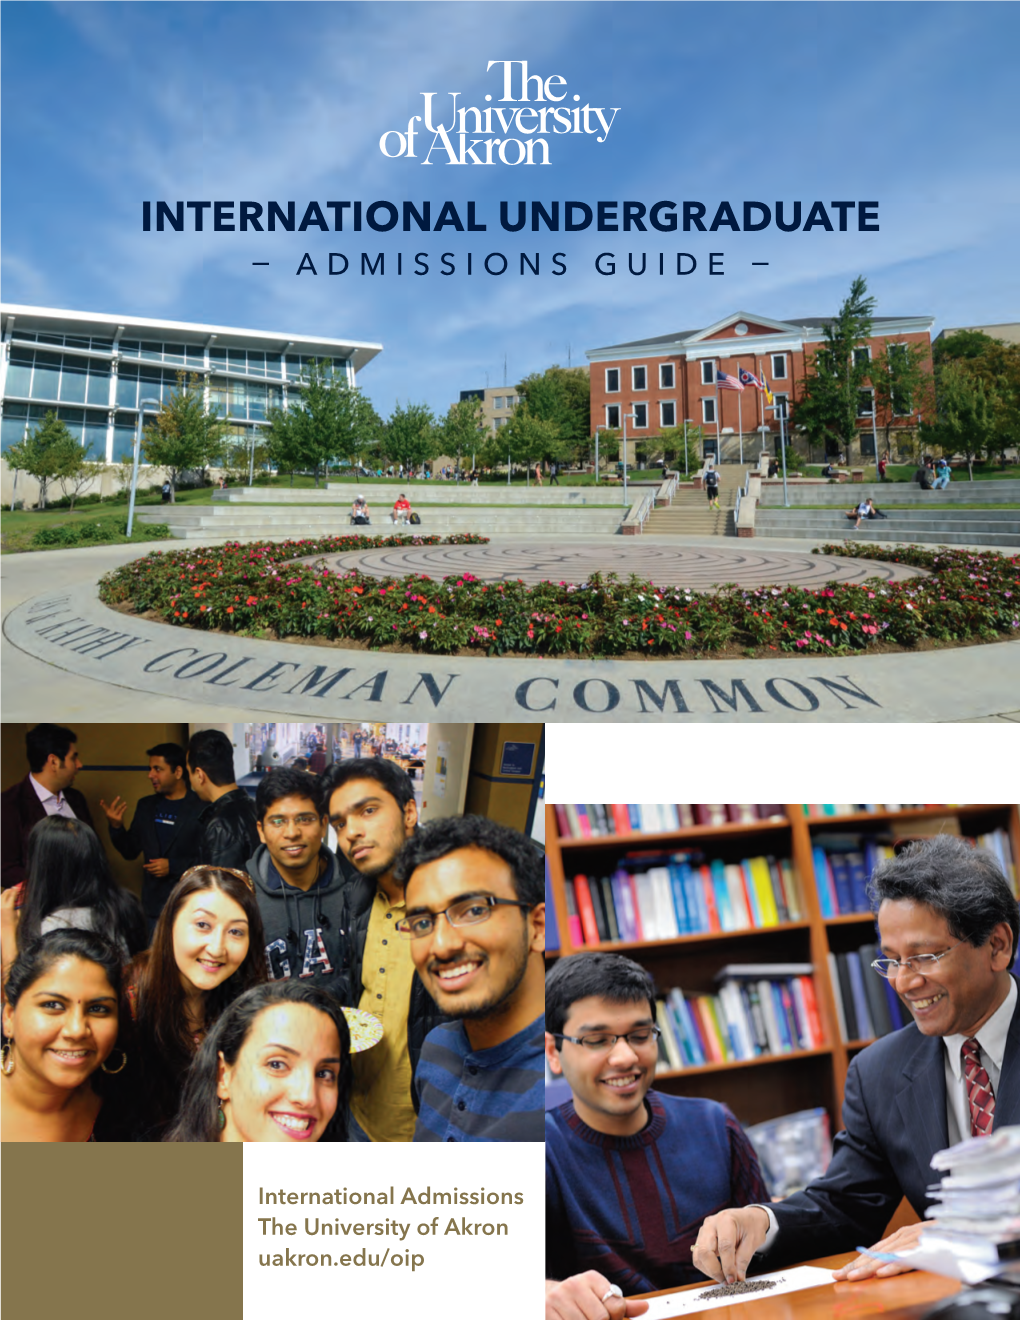 International Undergraduate Admissions Guide for The